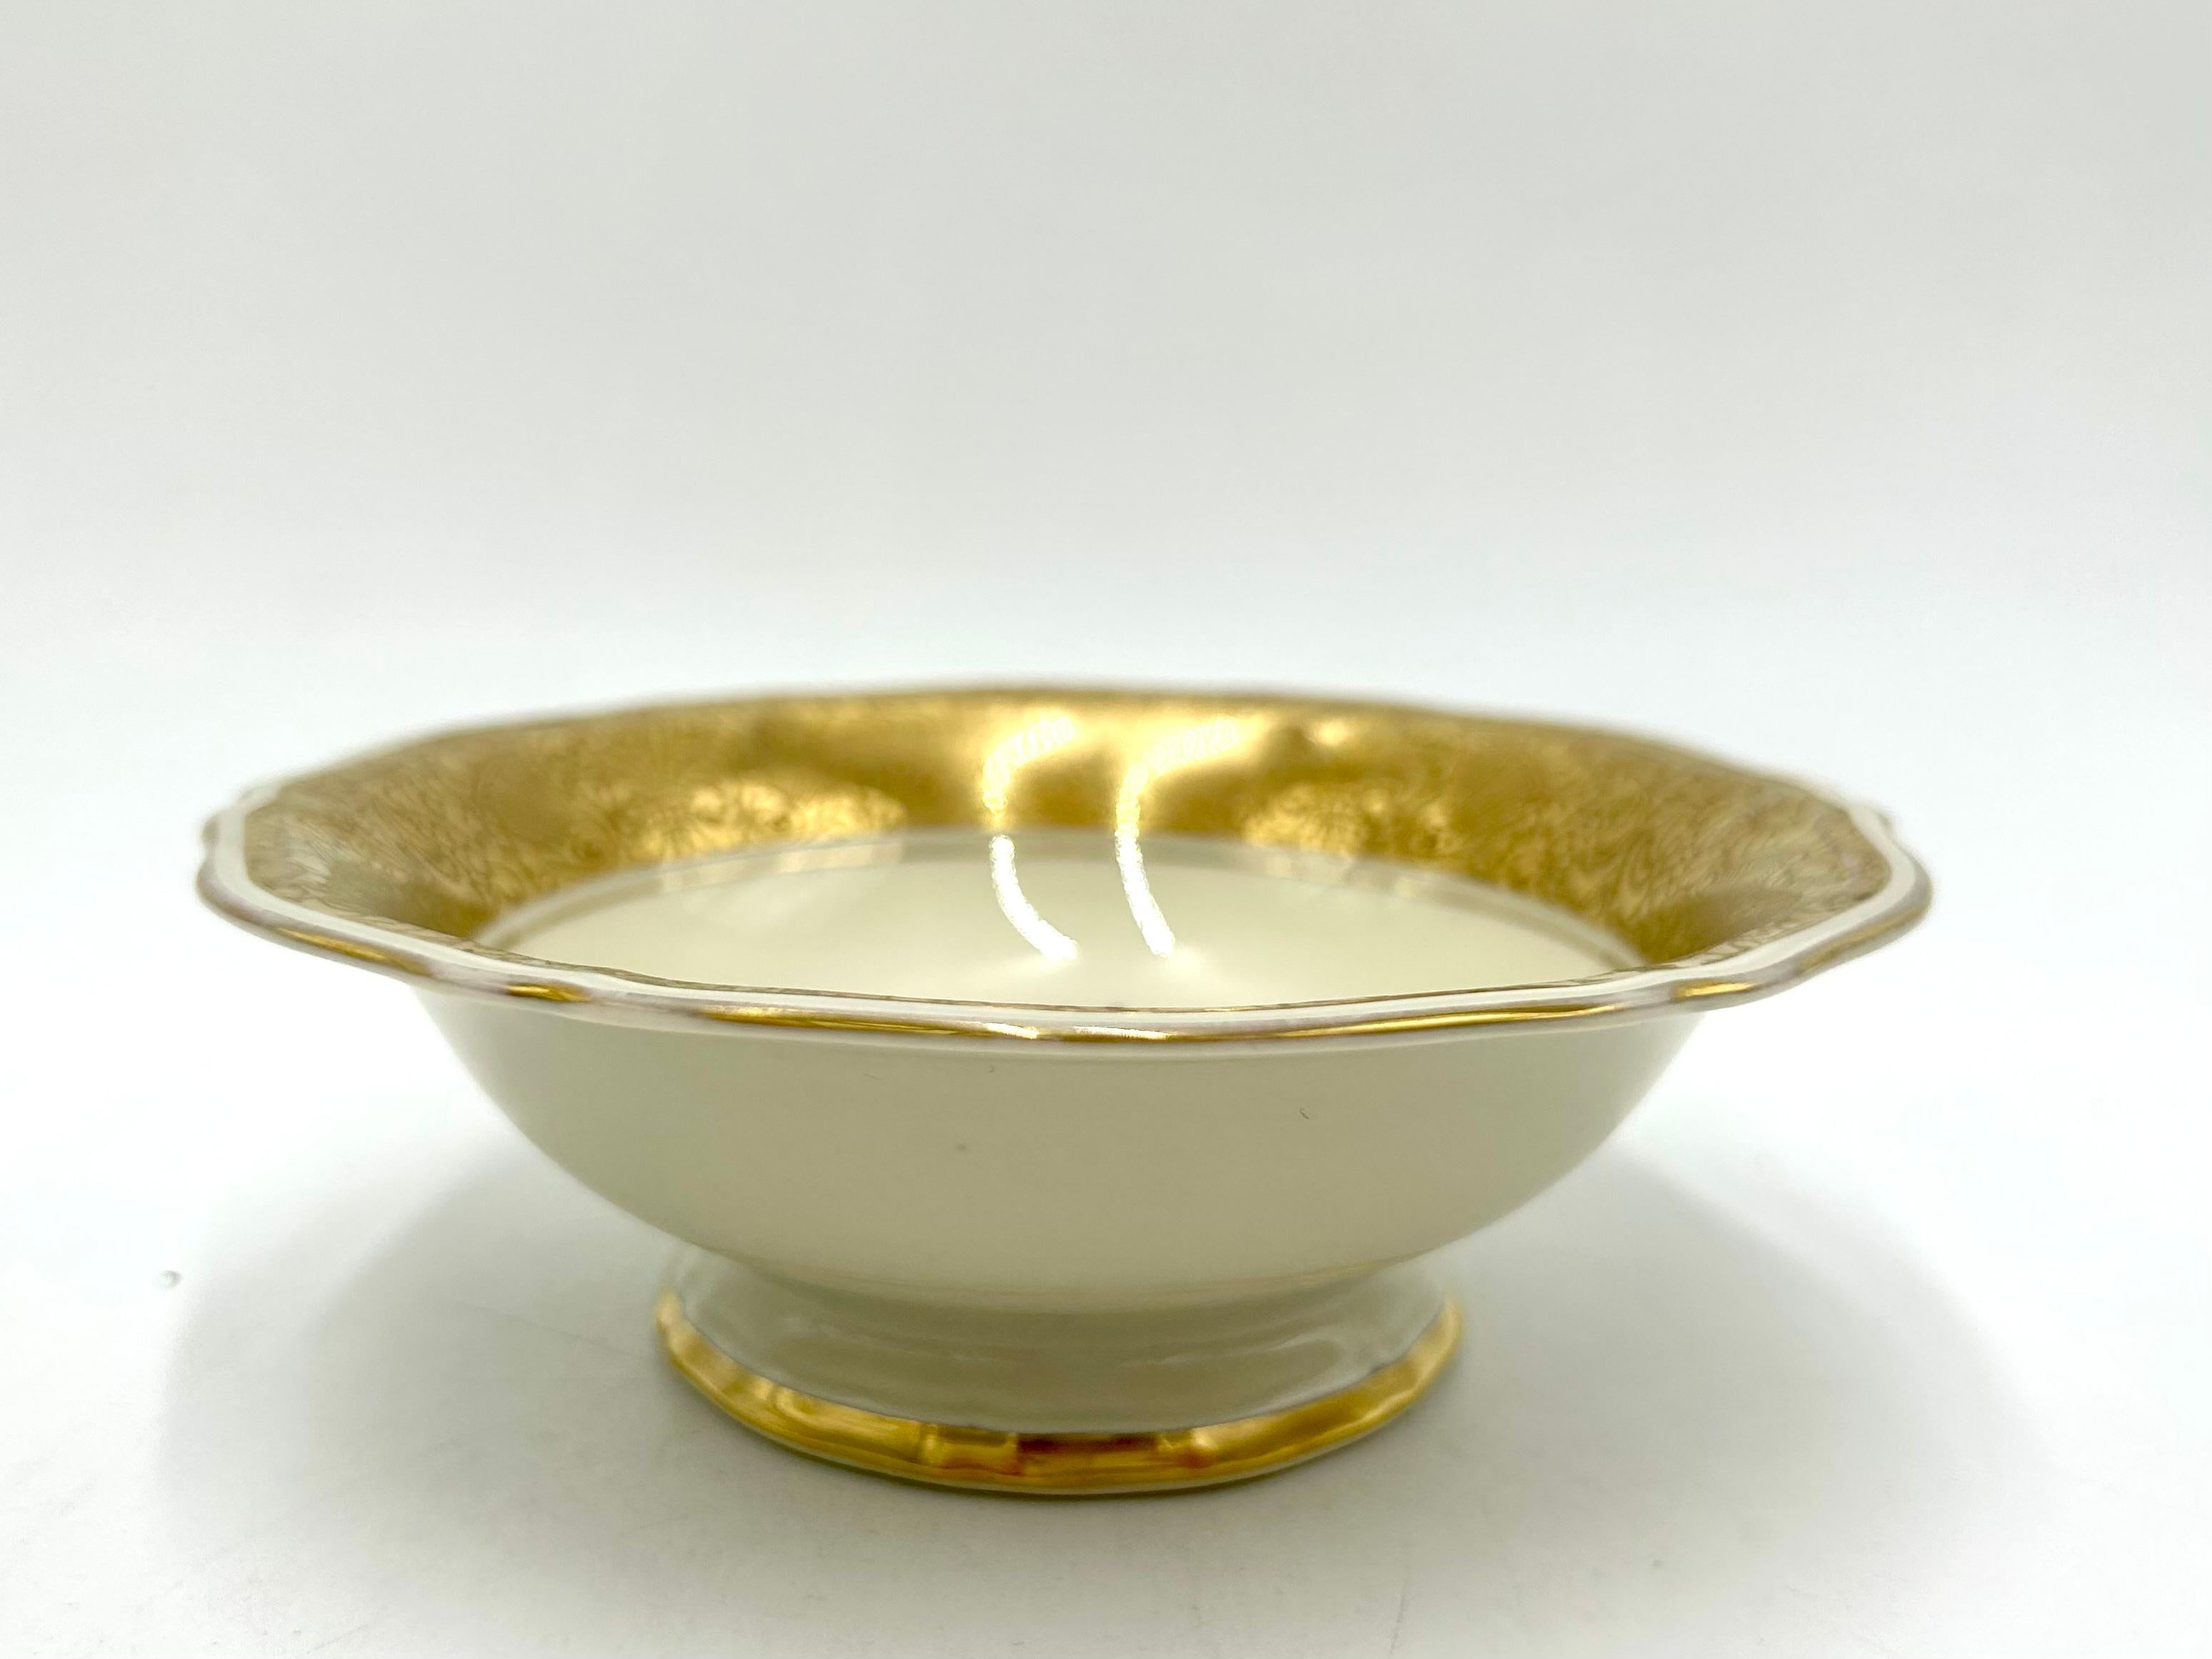 Beautiful porcelain platter-bowl in ecru color decorated with gilding and a floral motif
A product of the valued German manufacturer Rosenthal, marked with the mark used in 1948. A platter from the Classic elegant Chipendale series.
Very good